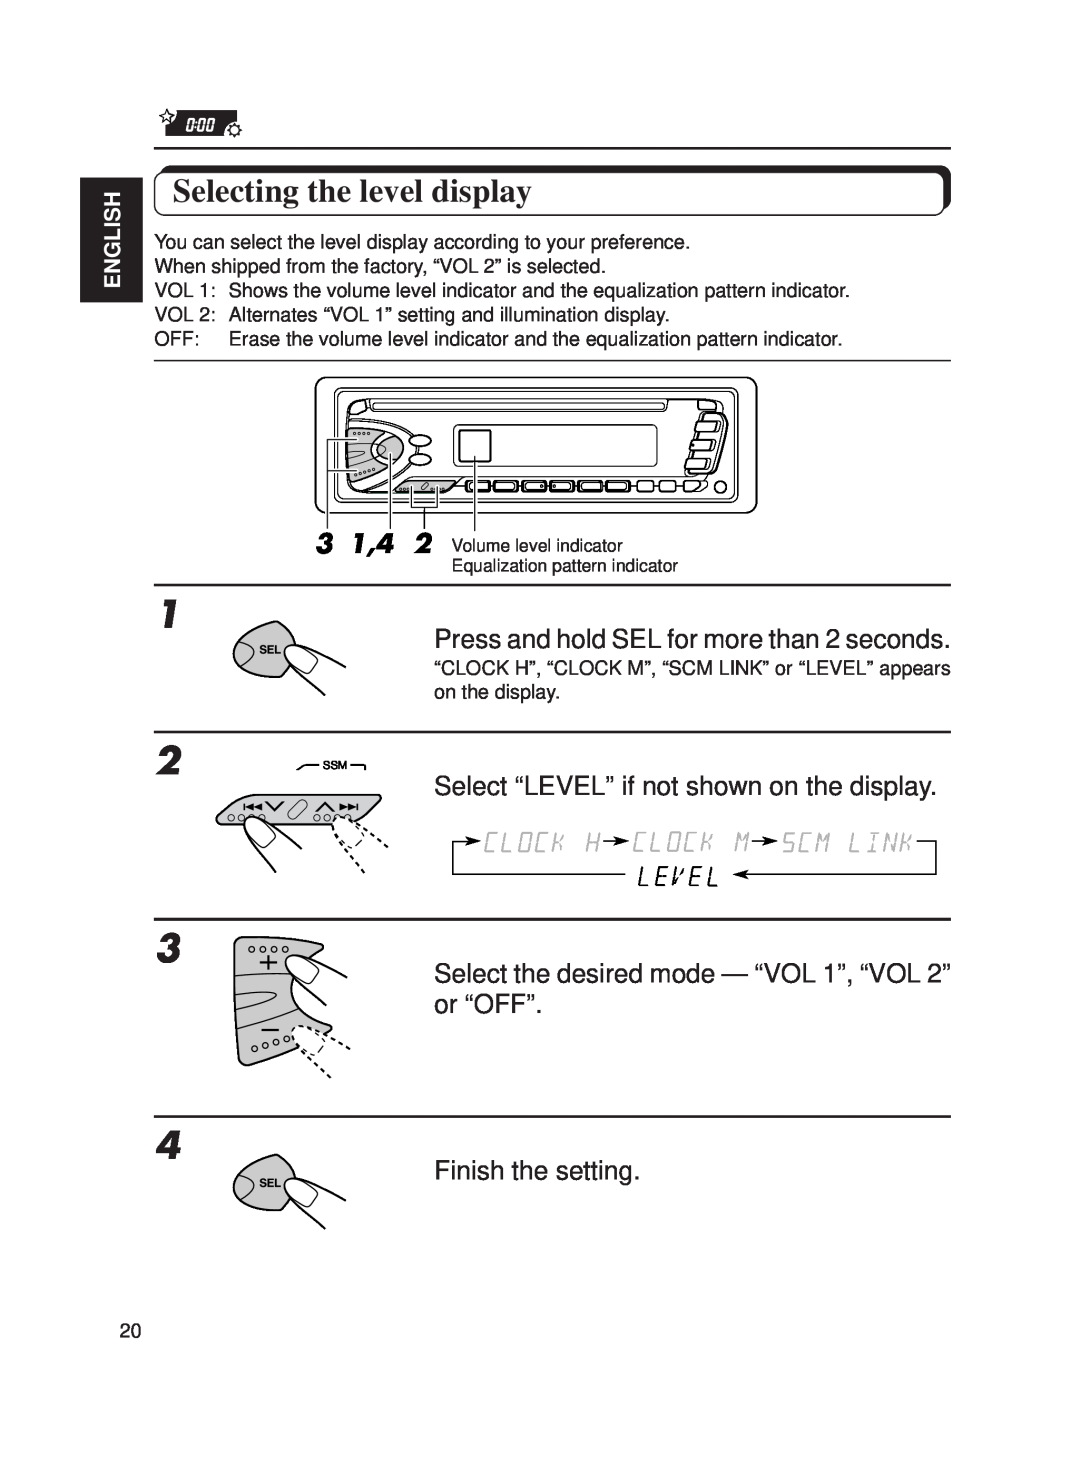 JVC KD-S620 manual Selecting the level display, Select “LEVEL” if not shown on the display, Finish the setting, English 